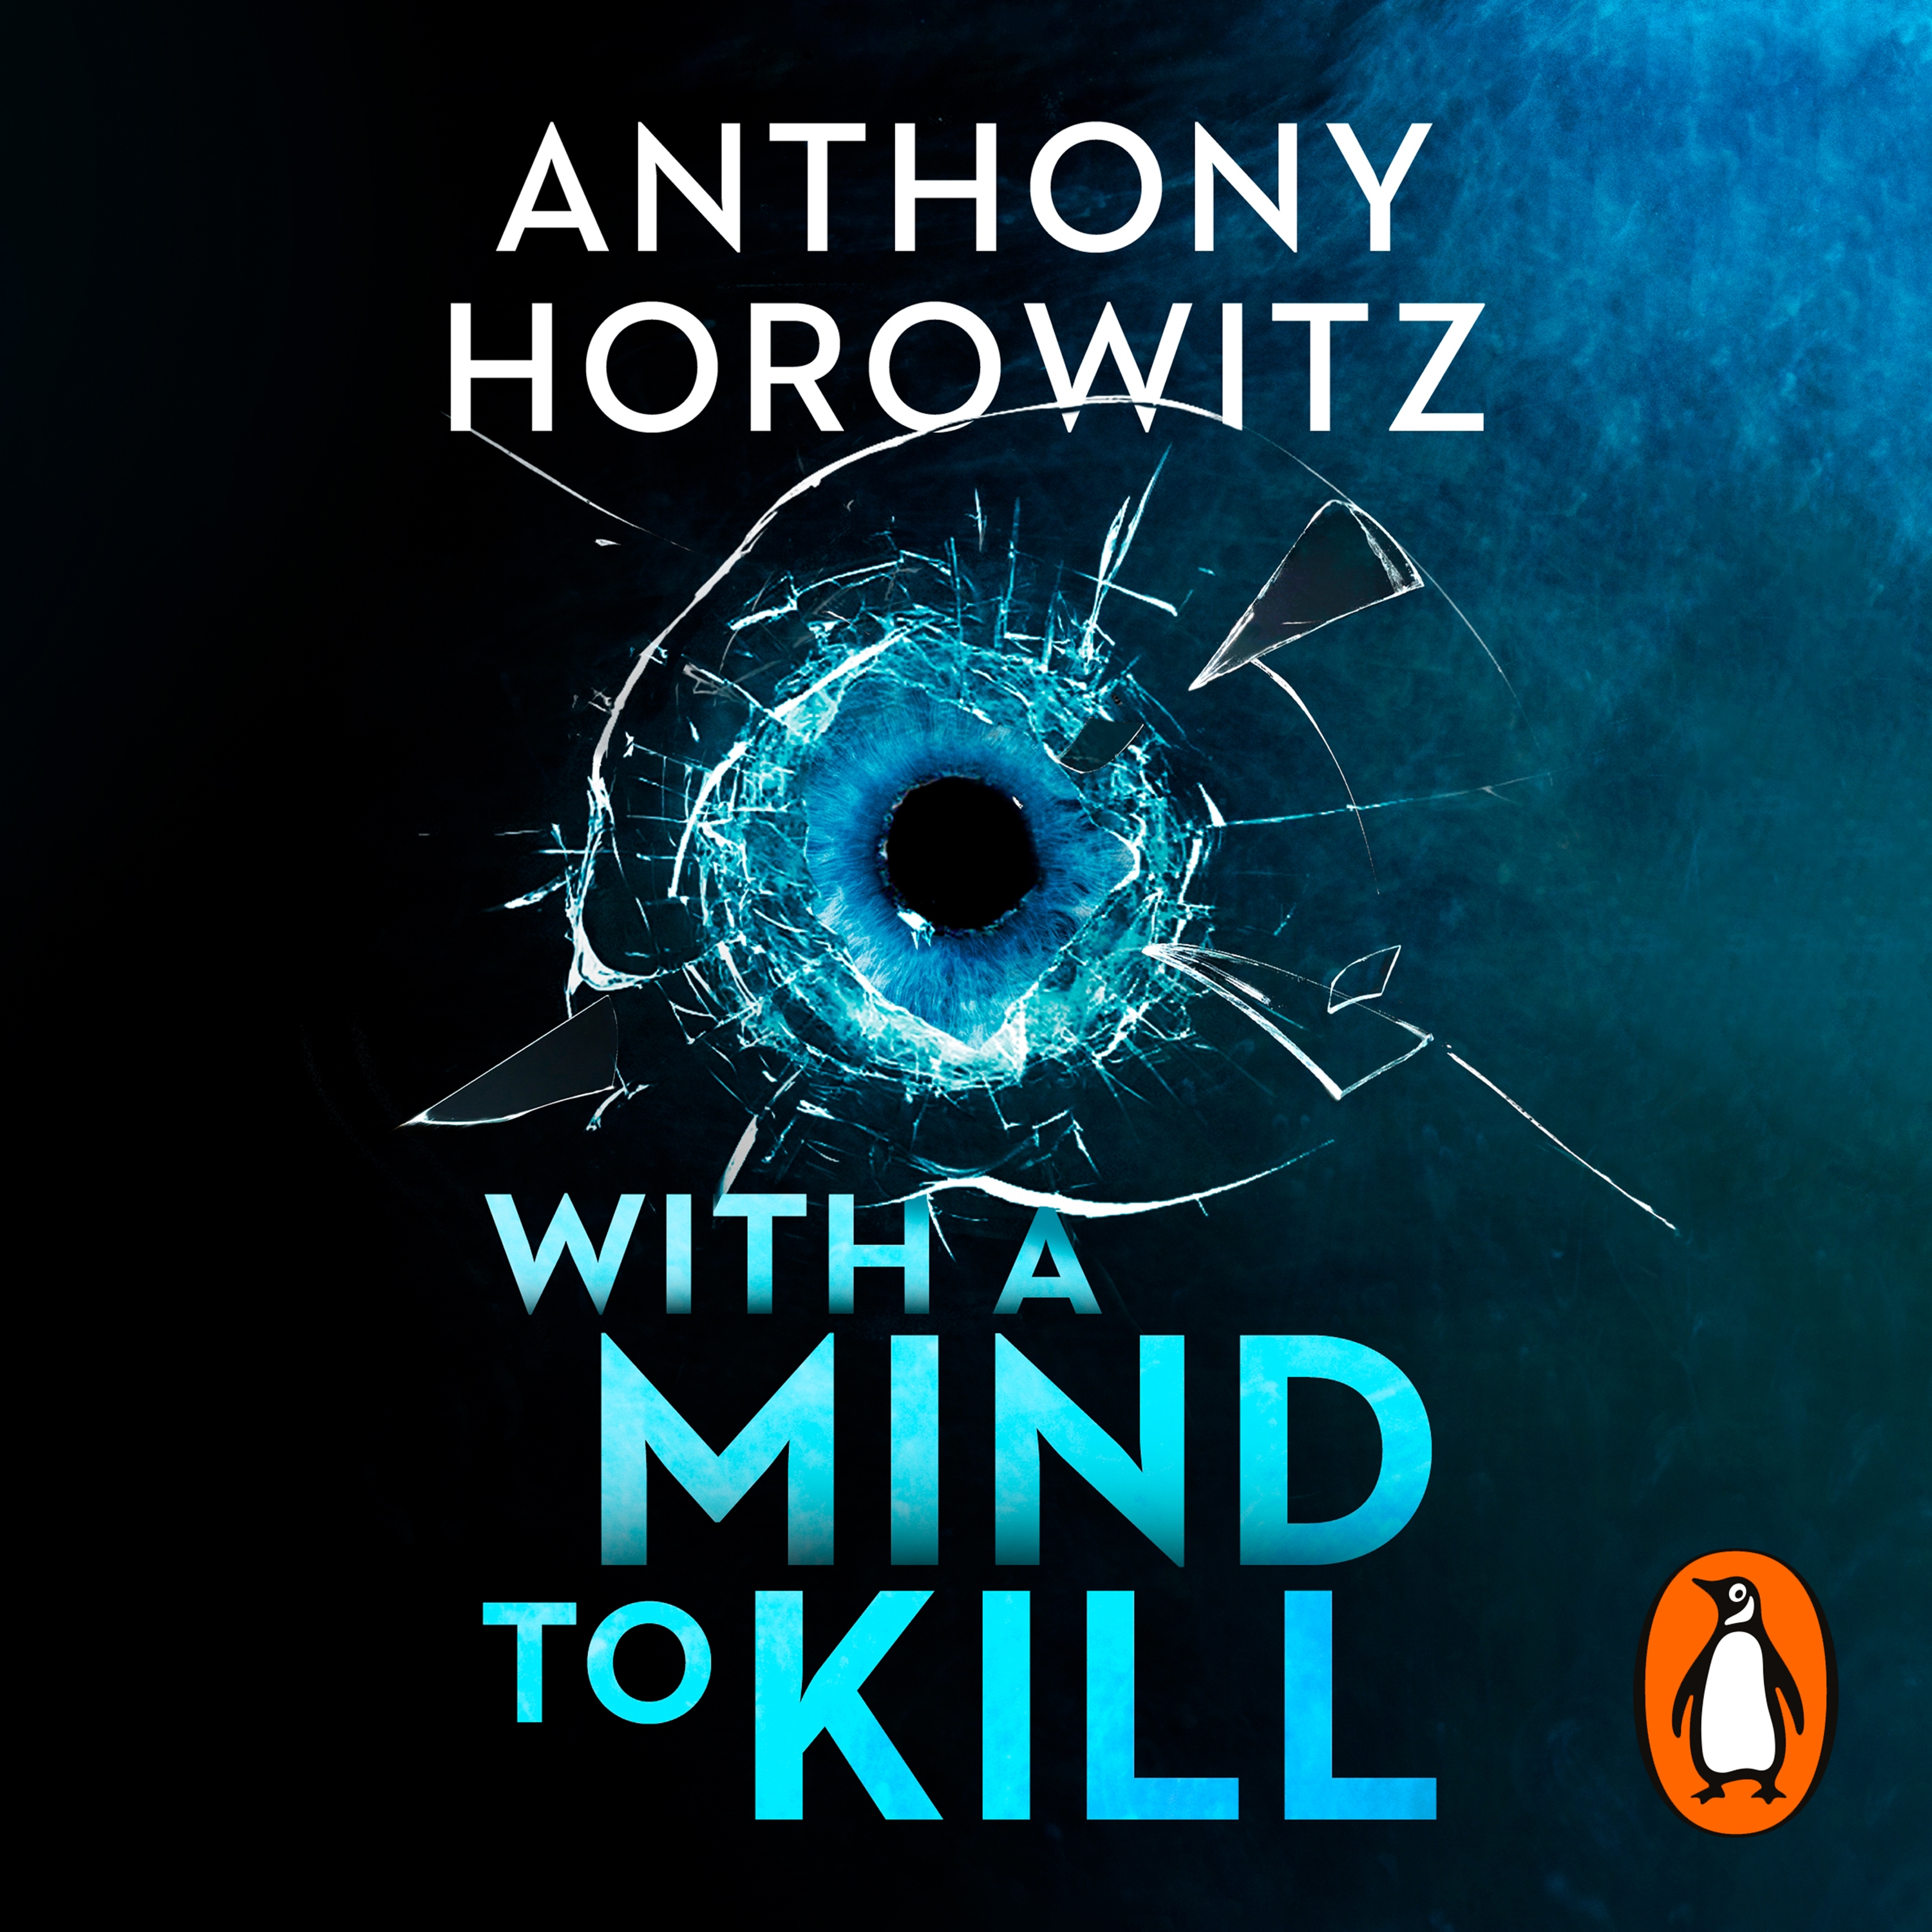 Cover of With a Mind to Kill by Anthony Horowitz. A dark blue background with a bullet hole shattering glass in the centre. The author's name is in white at the top, and the title is stacked in bright blue across the bottom.